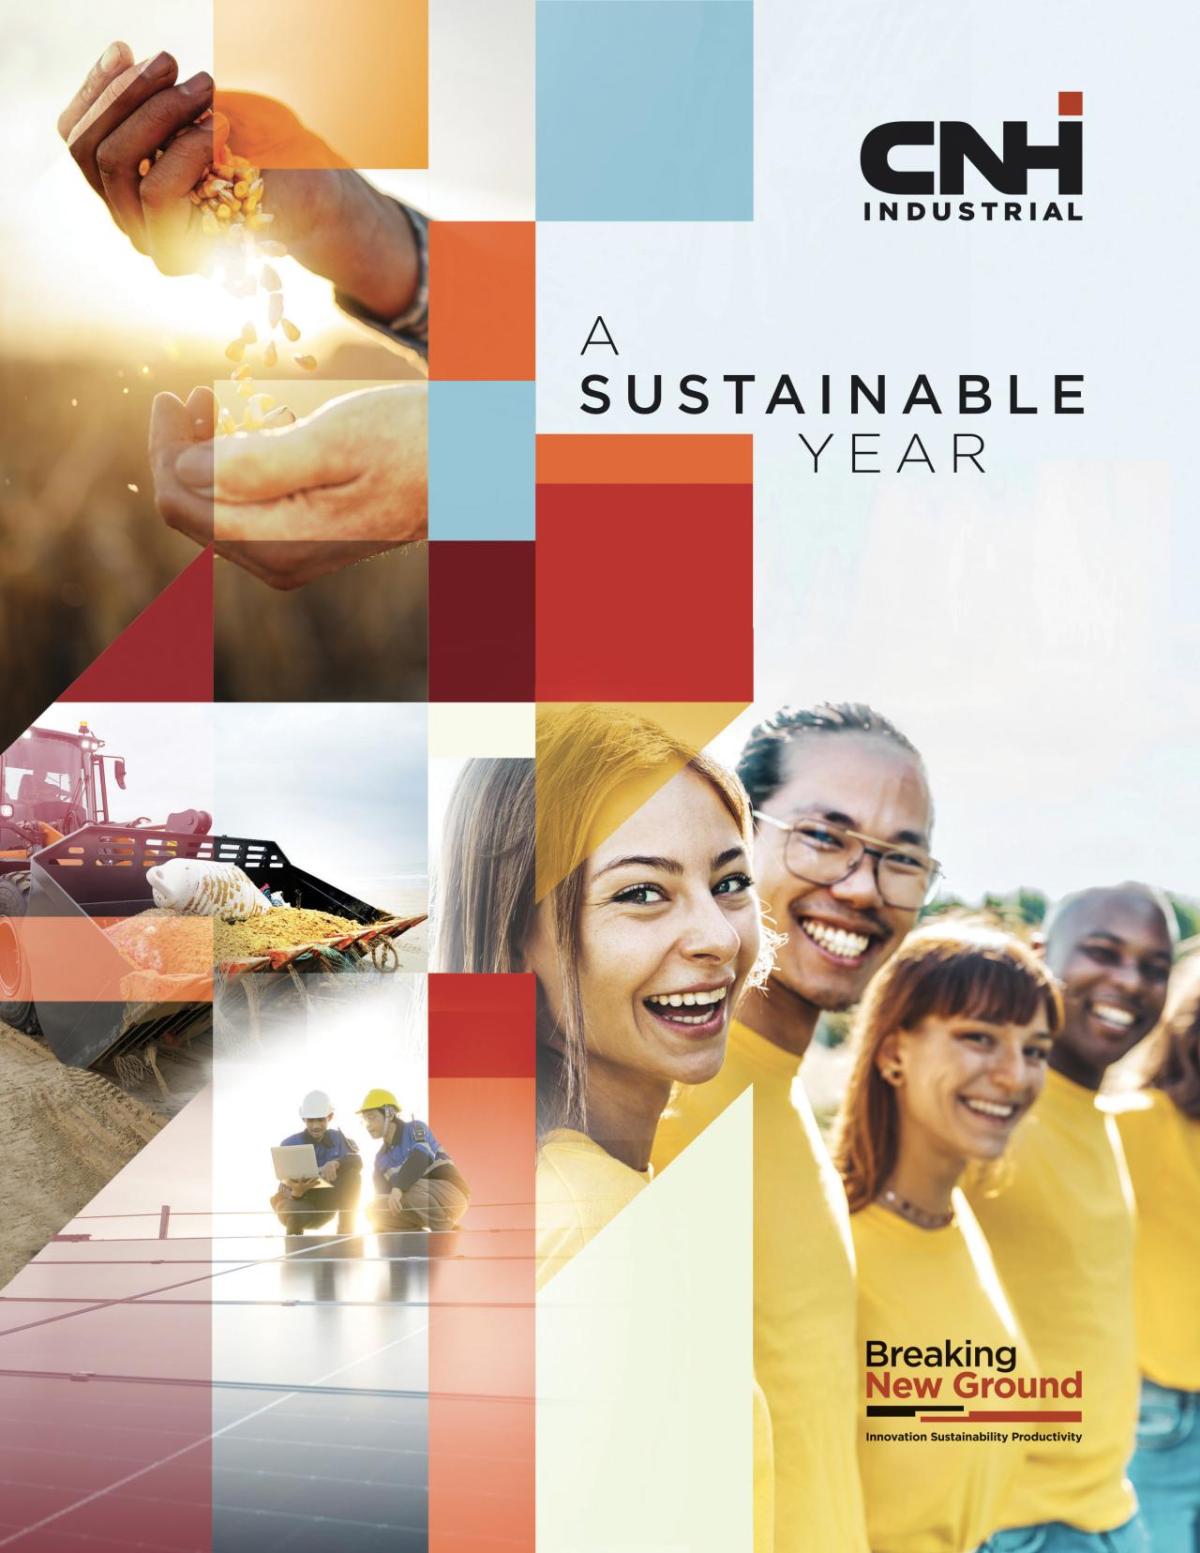 Cover of the report "A Sustainable Year".